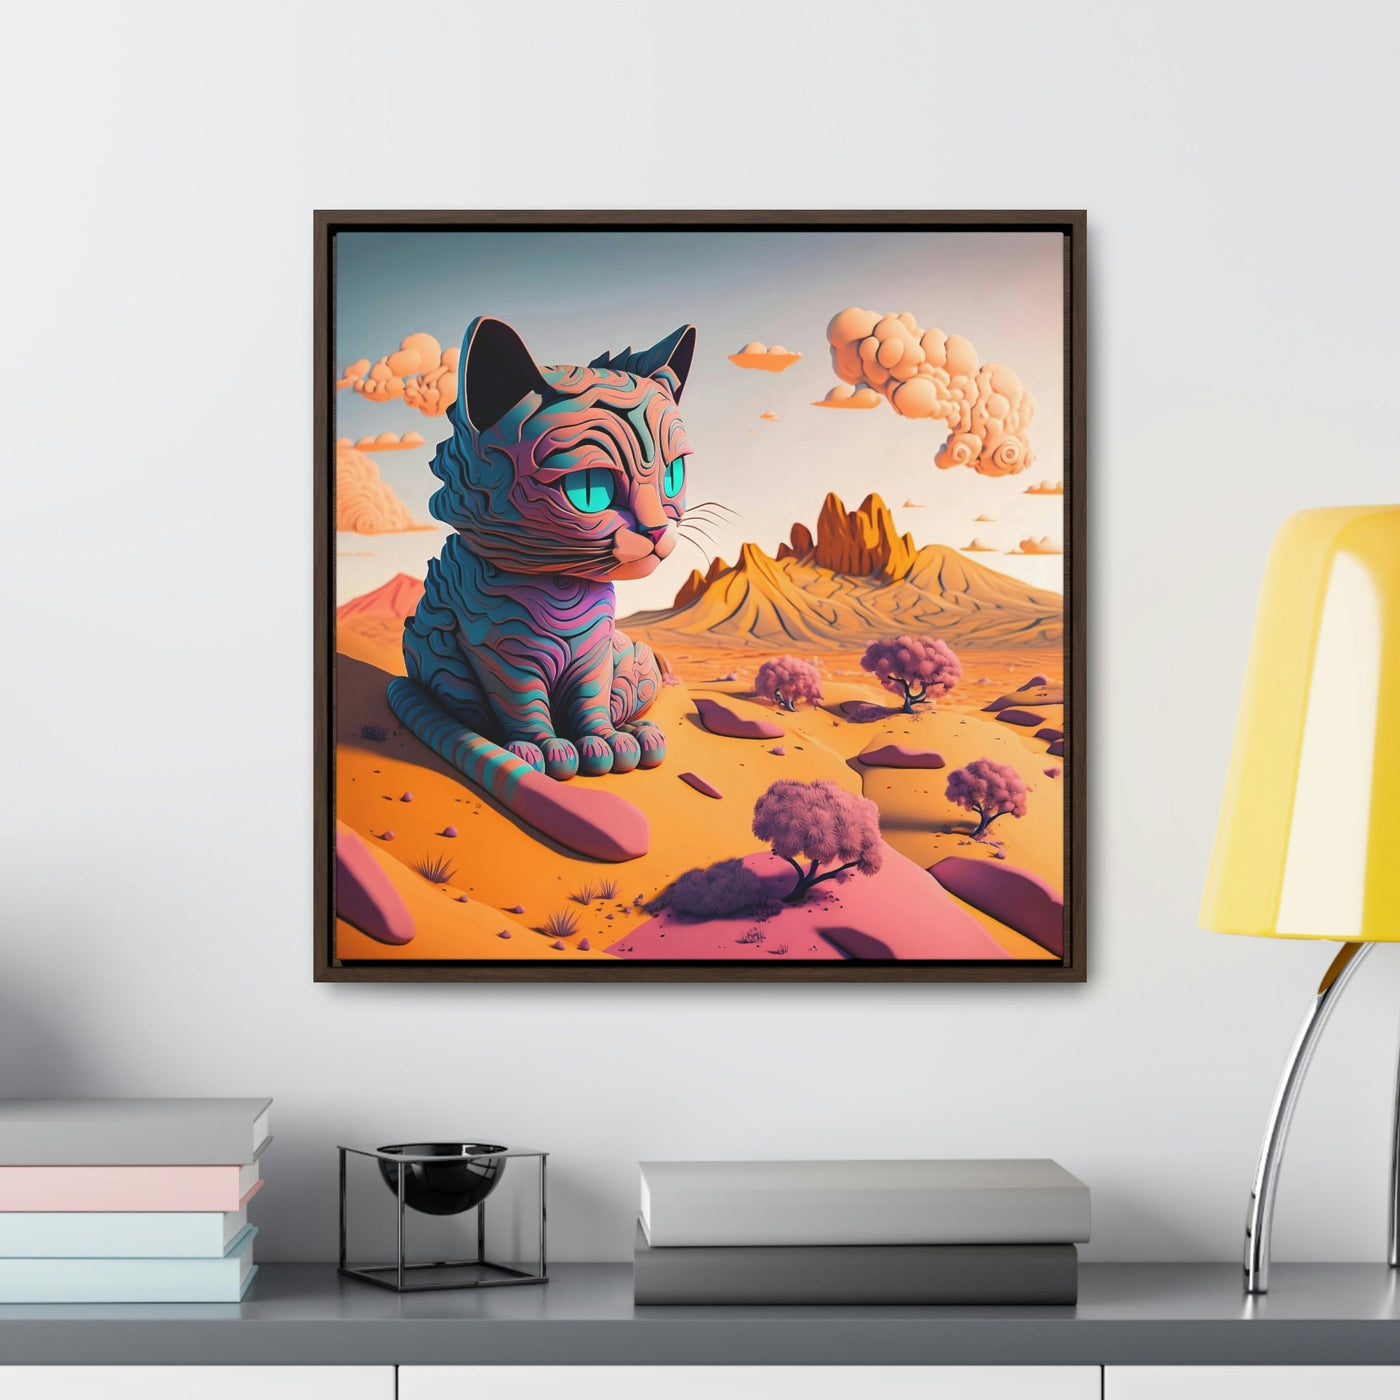 "Cutie Cat", Colourful Surreal Baby Cat - Dreamy Landscape | Framed Wall Canvas